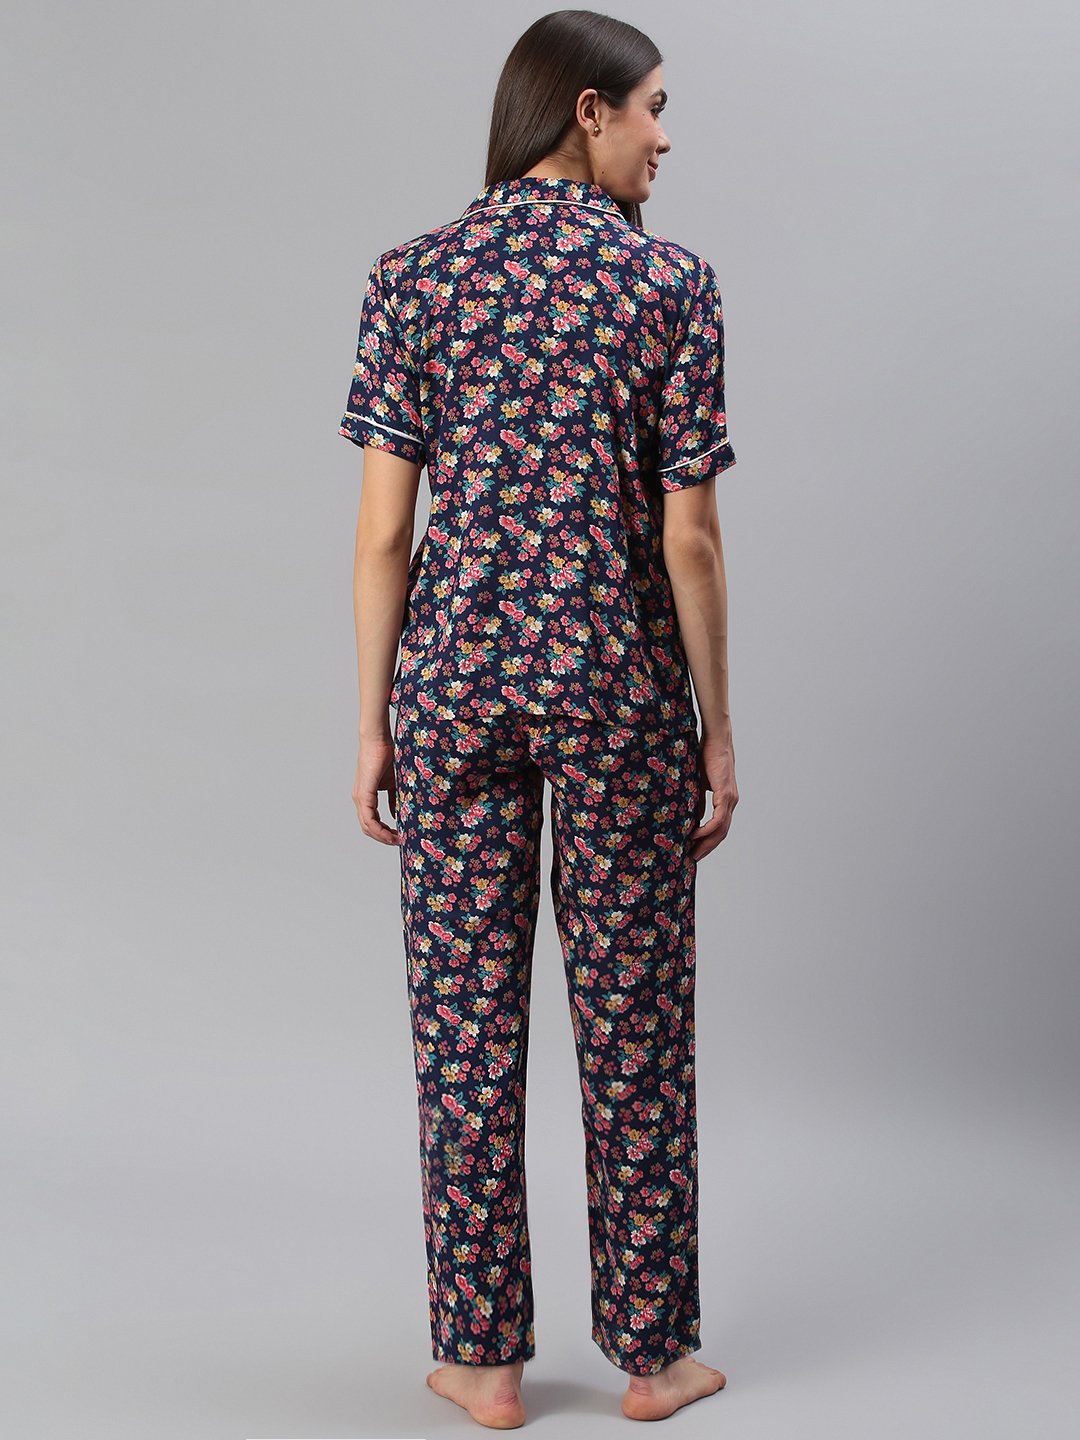 Cation Navy Floral Print Night Suit